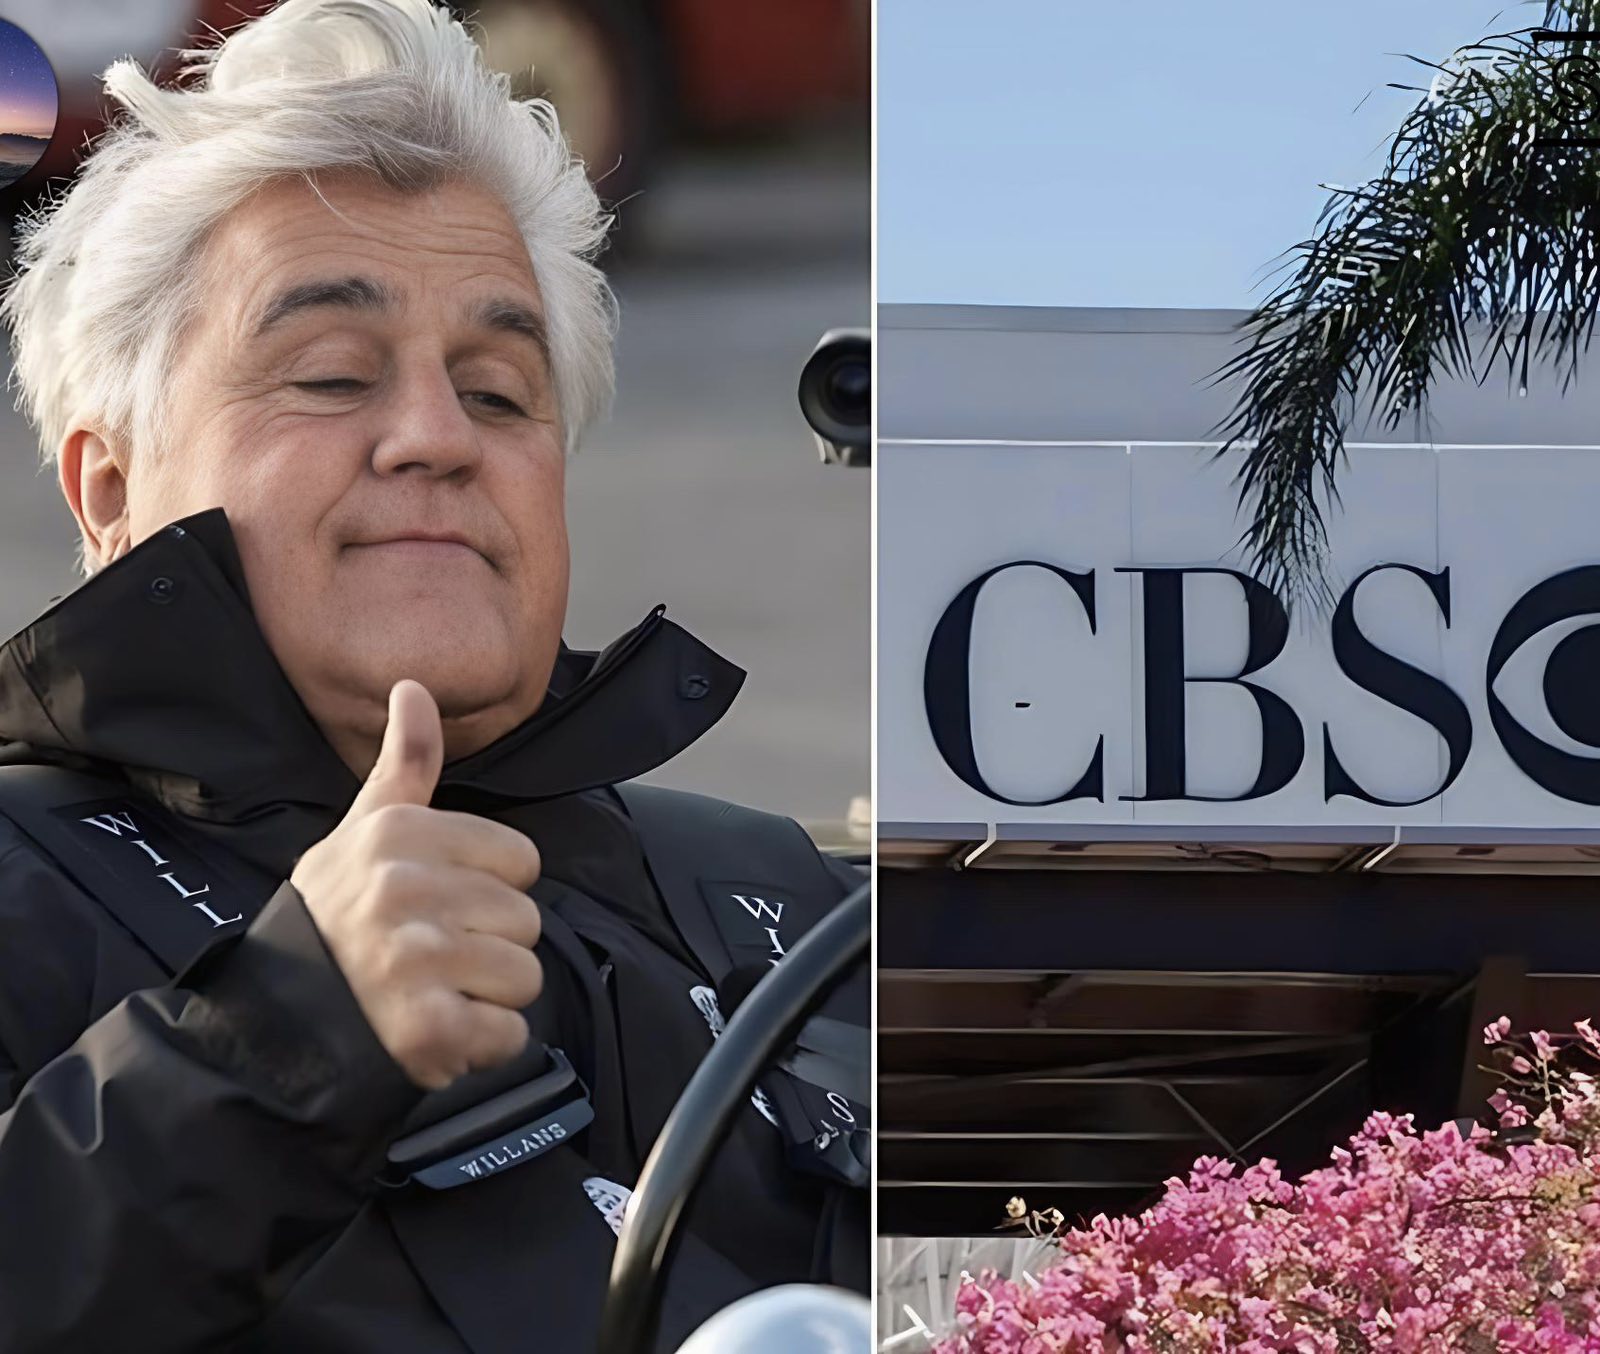 CBS Secures a $1 Billion Agreement with Jay Leno for Late-Night Programming